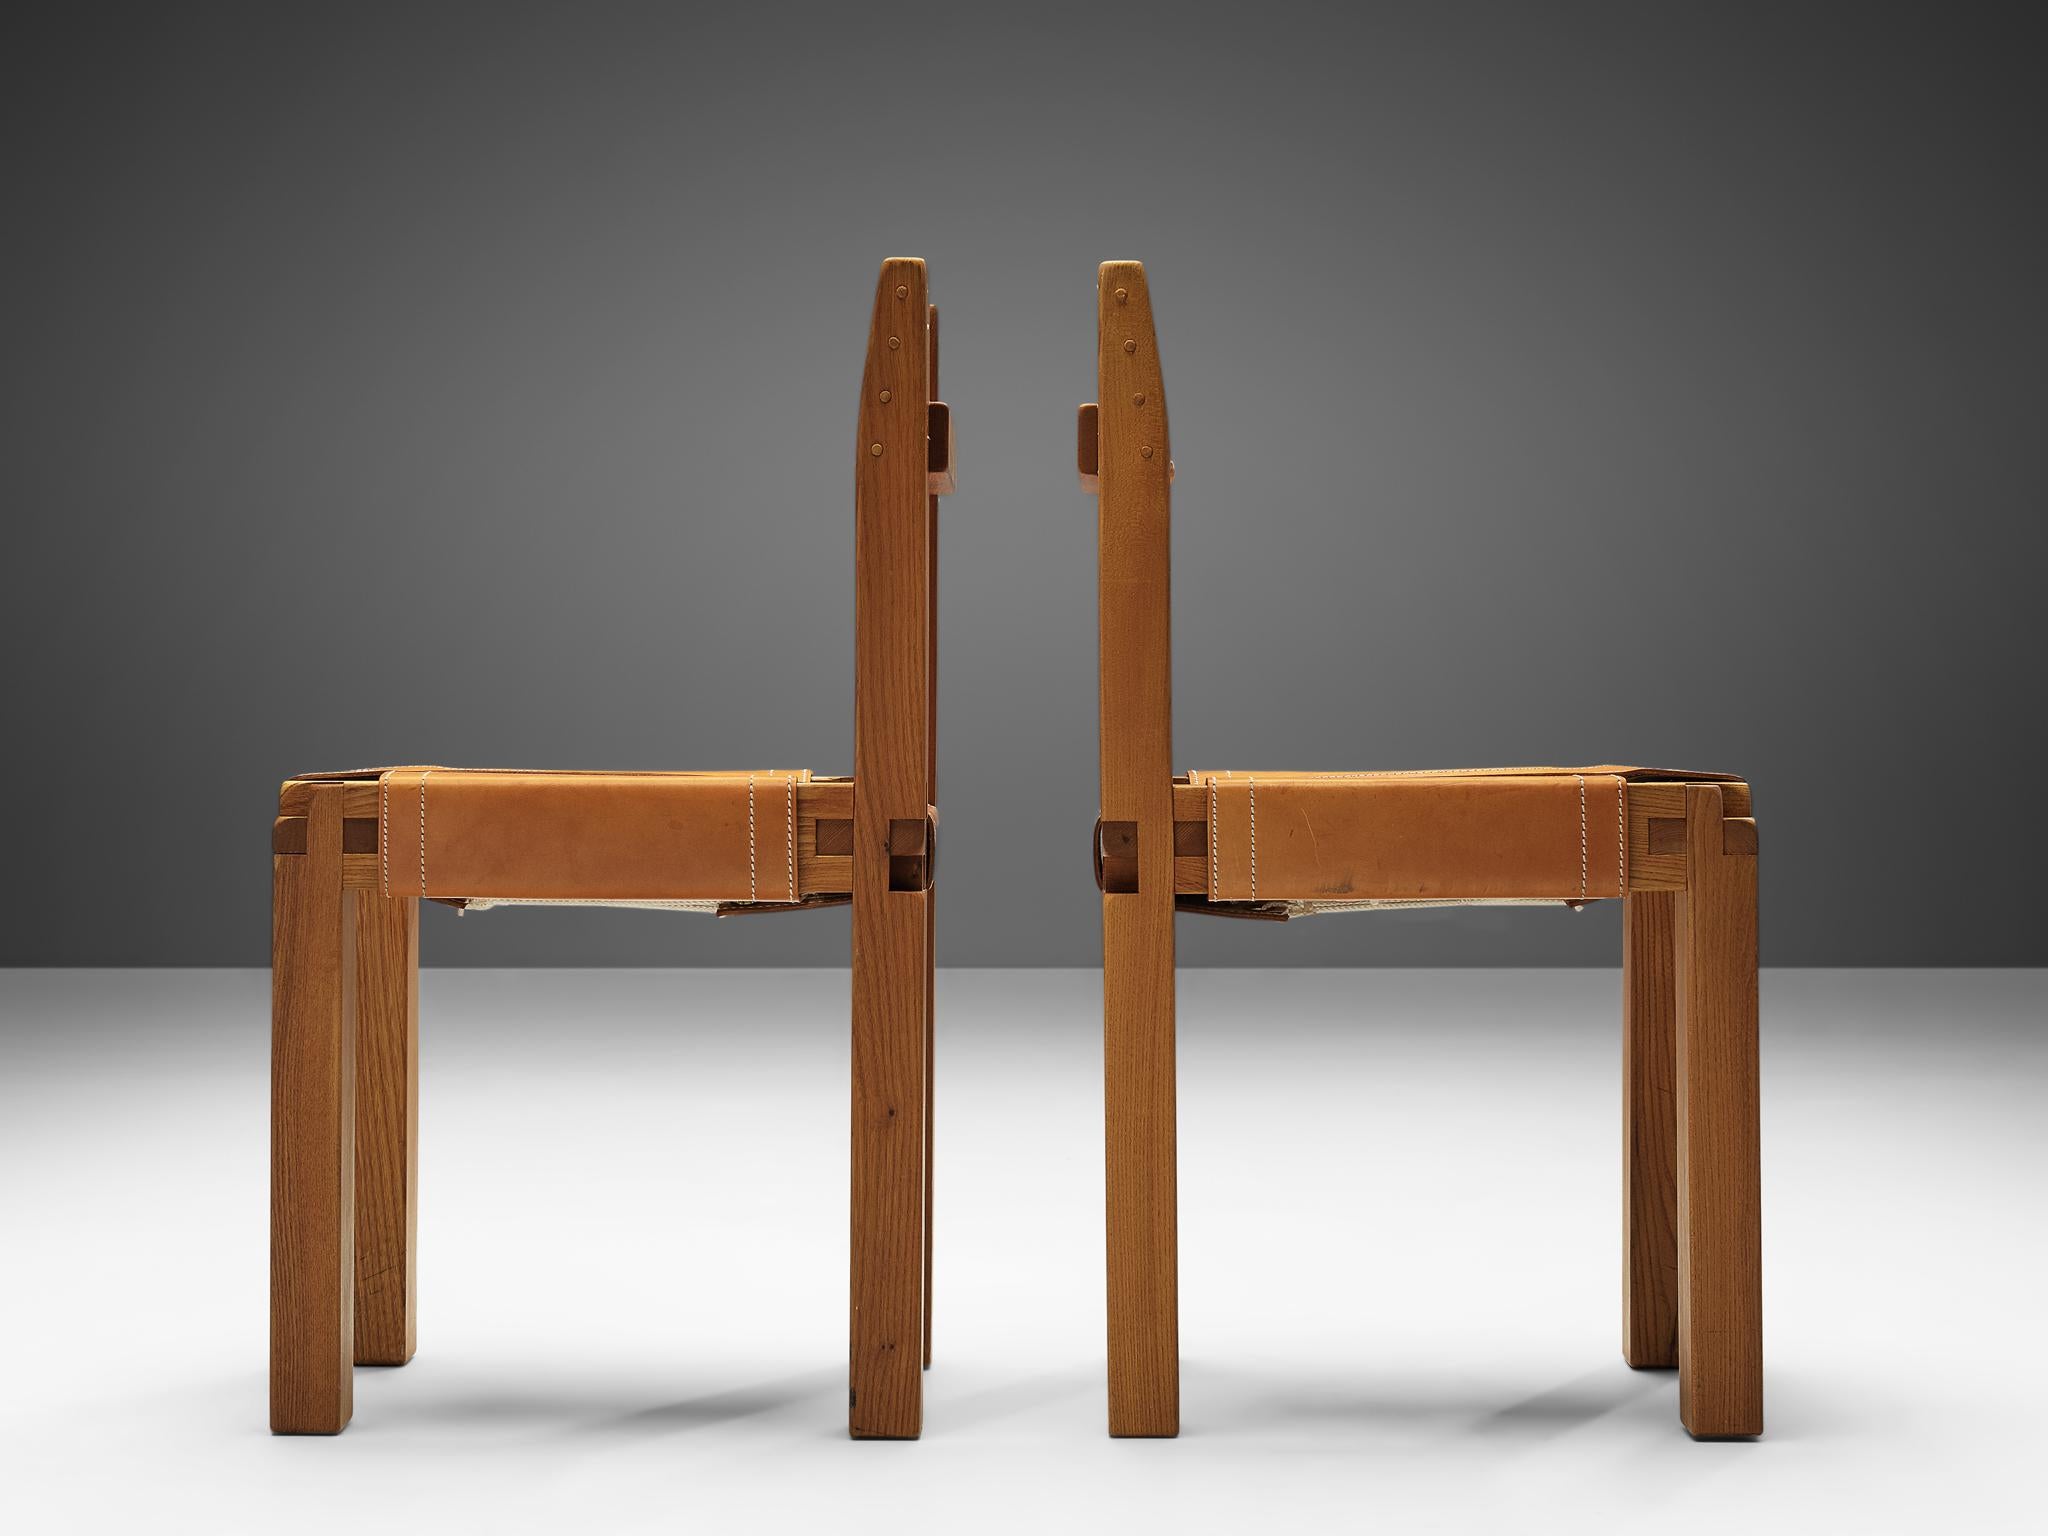 Pierre Chapo, pair of dining chairs, model S11, elm and leather, France, circa 1966.

A pair of chairs in solid elmwood with cognac leather seating and back, designed by French designer Pierre Chapo. These chairs have a cubic design of solid